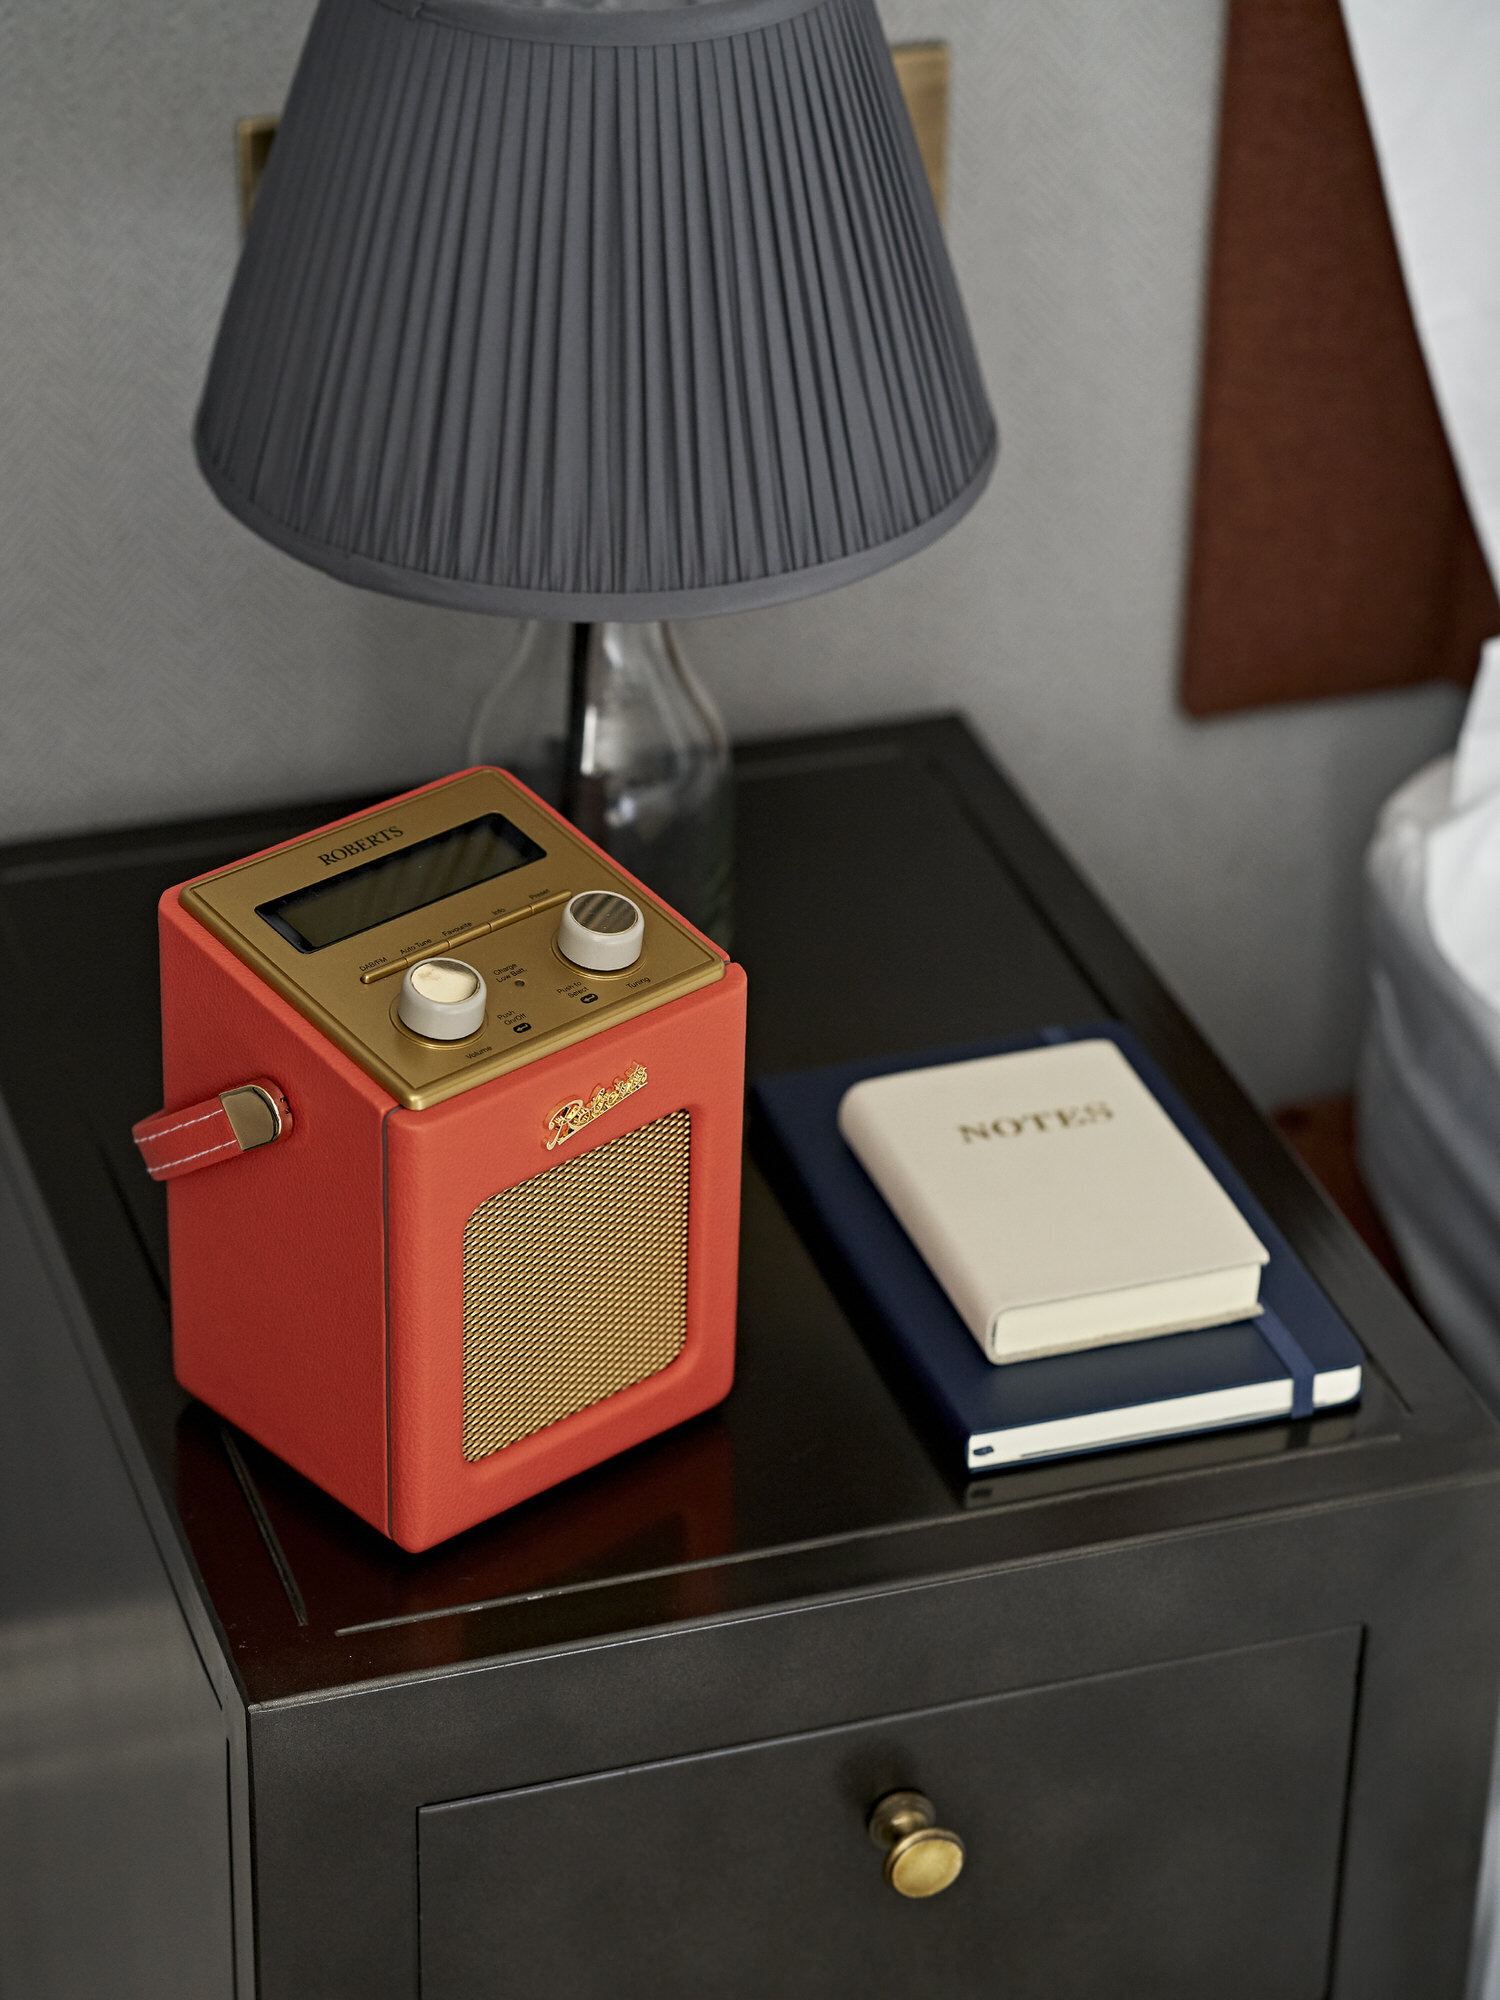 black end table in bedroom with red radio